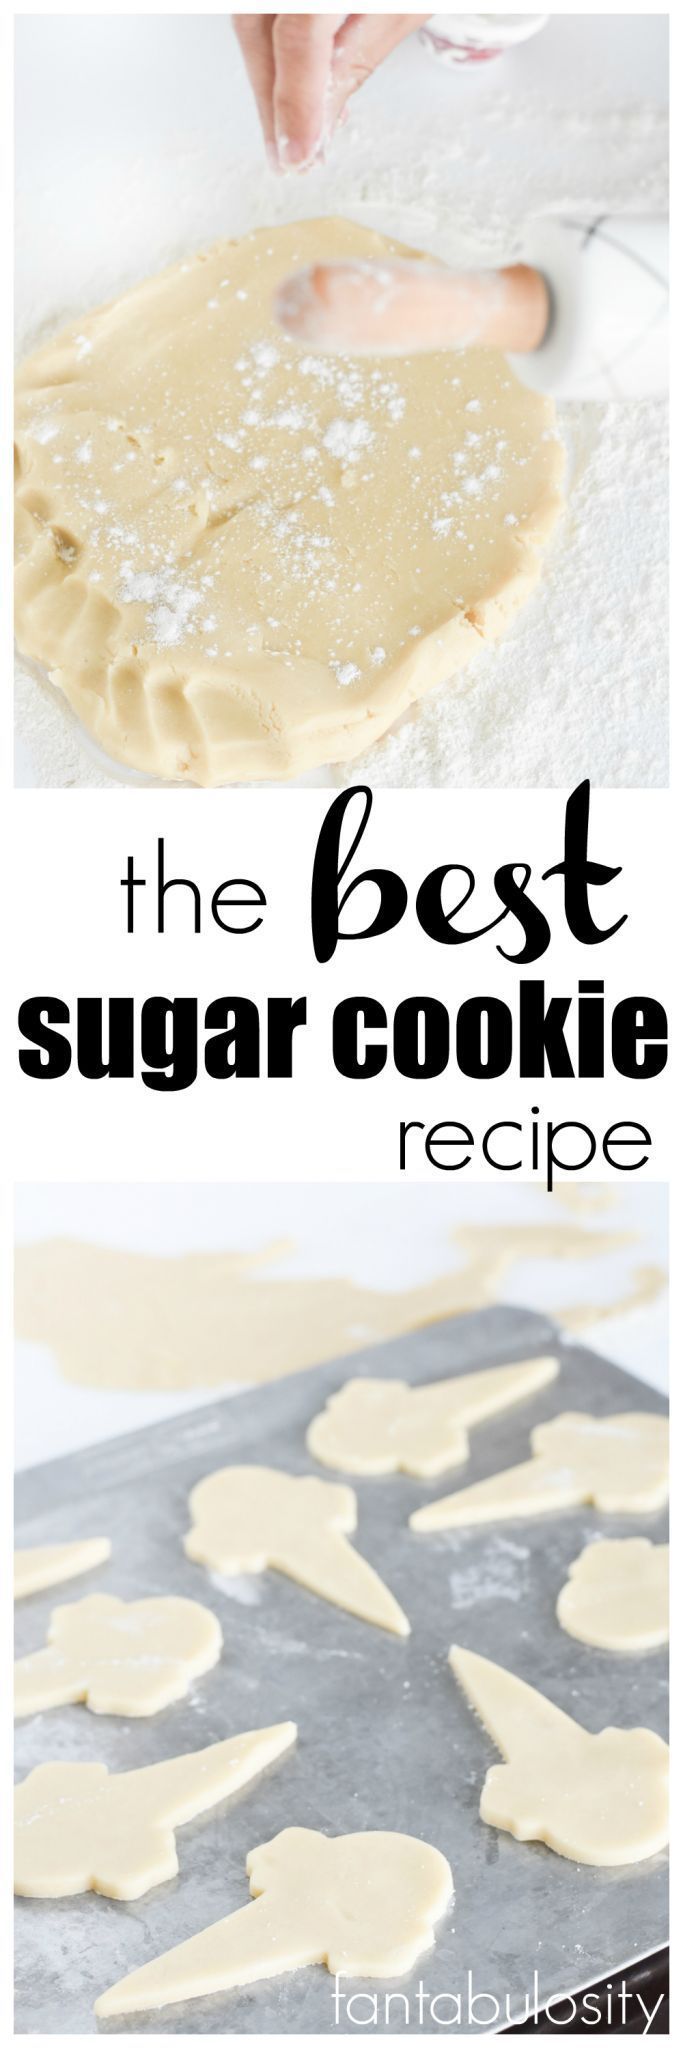 The BEST Sugar Cookie Recipe for decorating and eating. After baking, freeze them